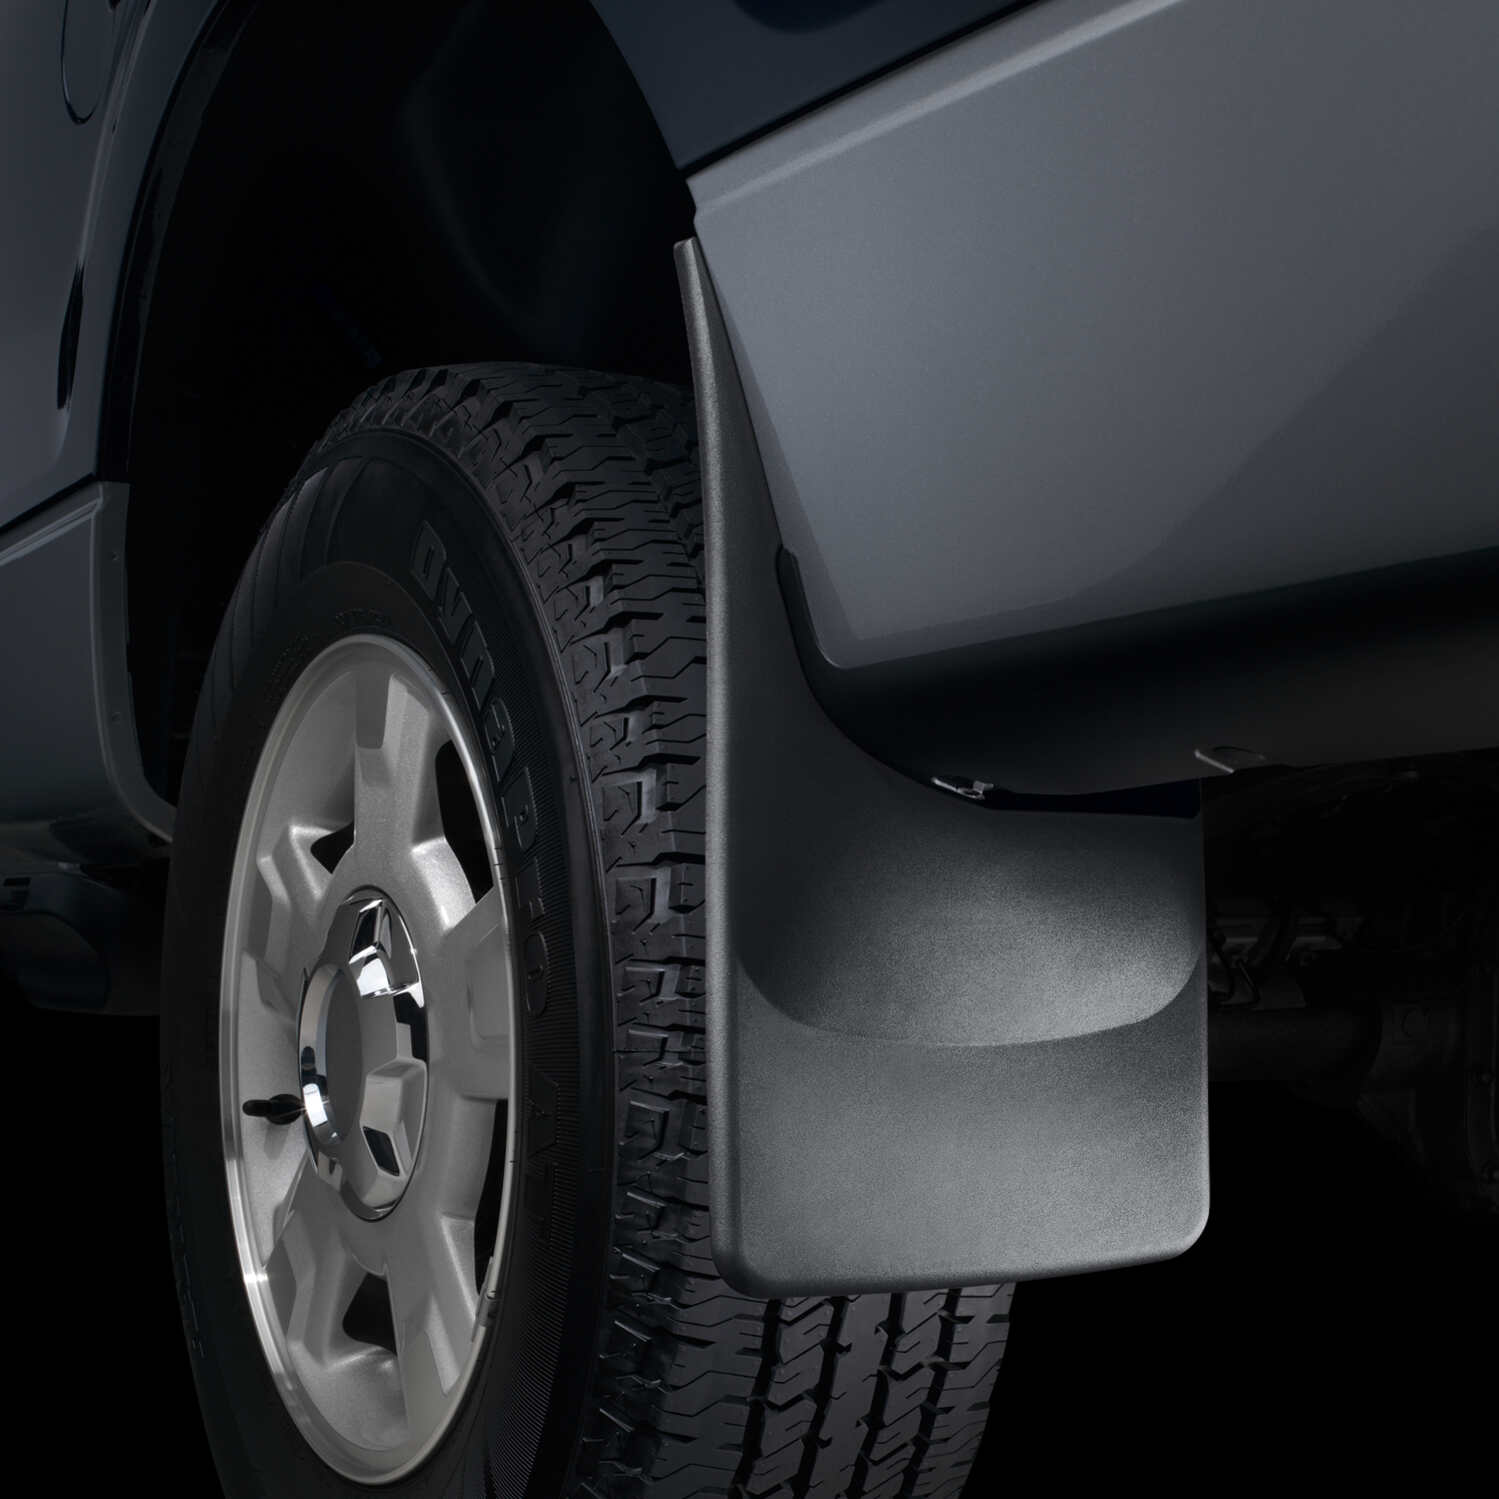 WeatherTech mudflaps help to keep the spray of water and dirt away from your vehicle, keeping it cleaner and safer, these products are easy to fit to most vehicles